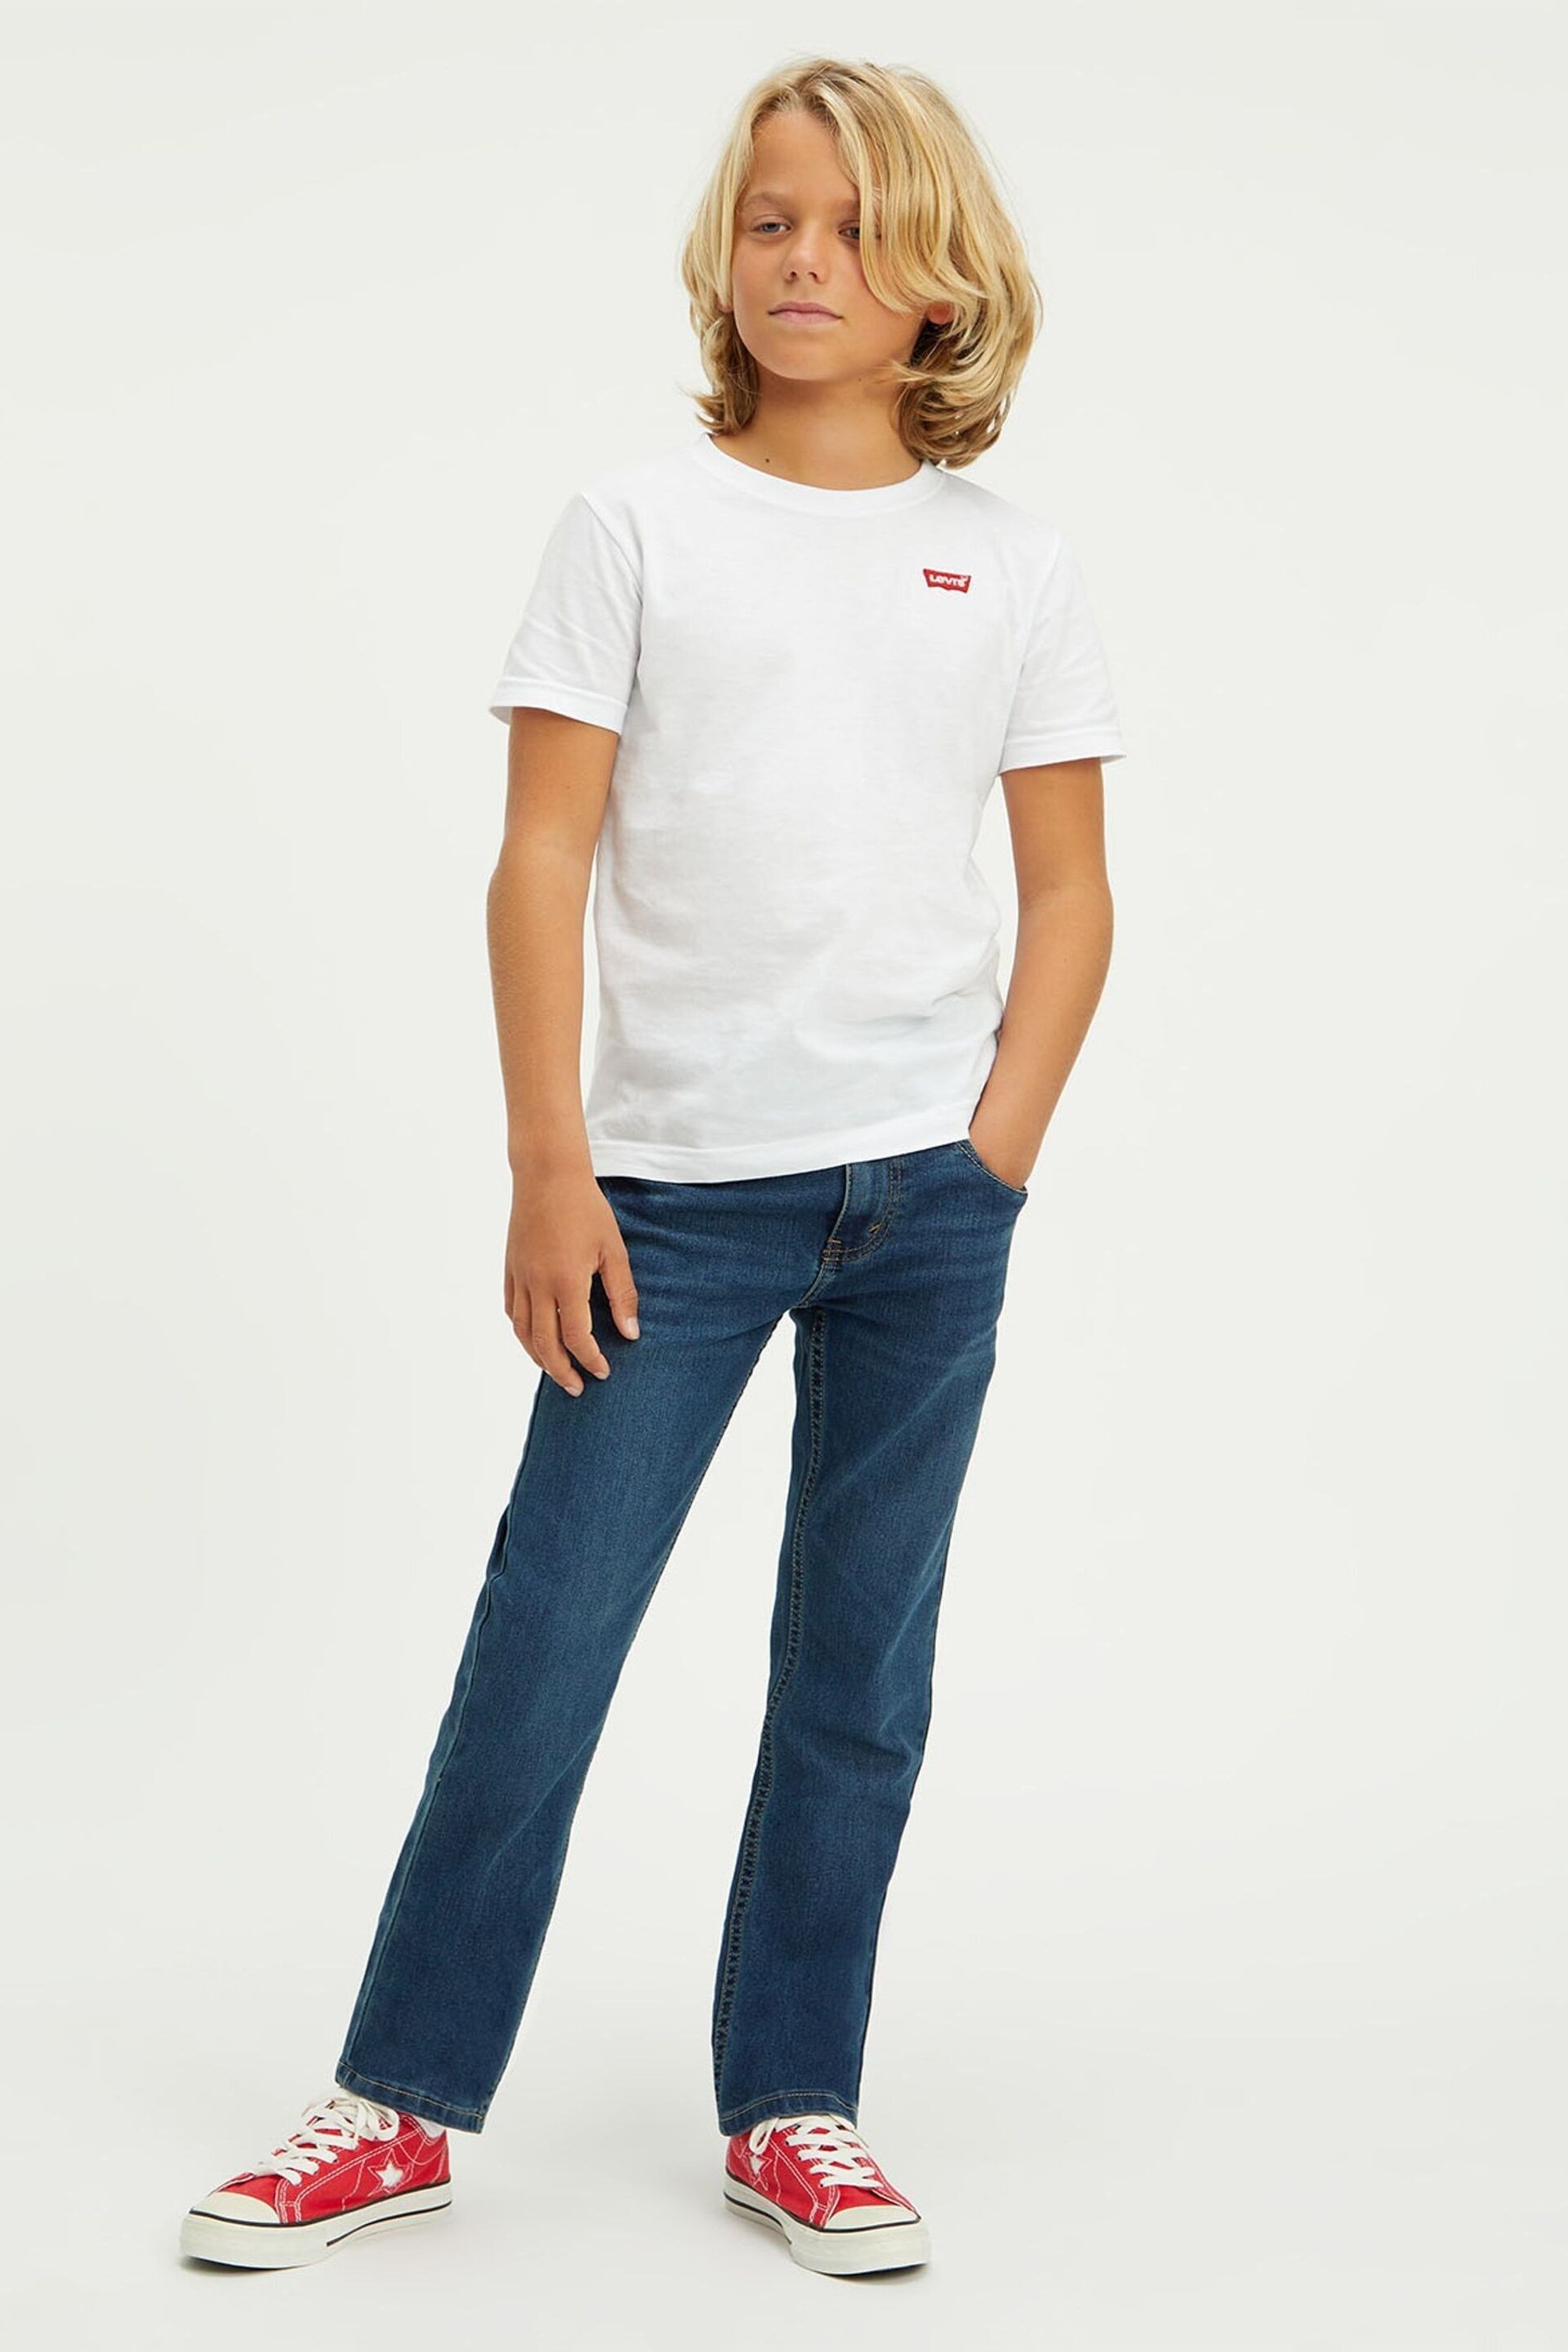 Levi's® White Small Chest Batwing Logo T-Shirt - Image 3 of 5